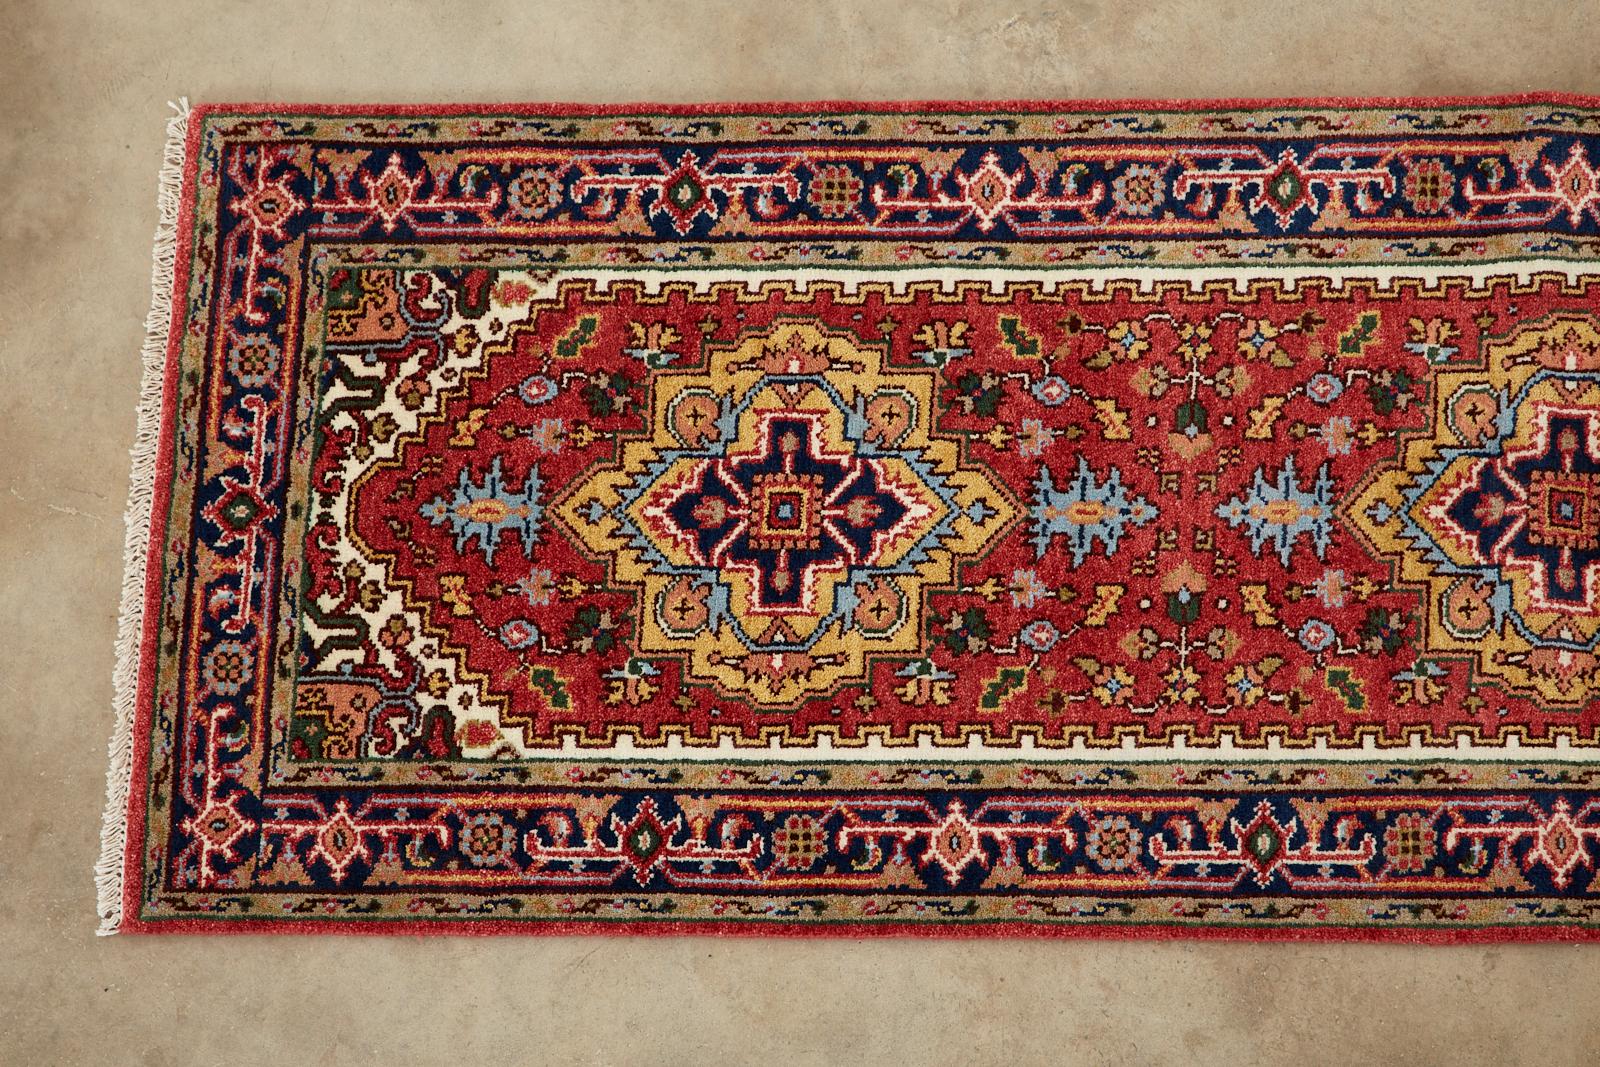 Vibrant and colorful Indo Persian runner with a Heriz Serapi style design. Made of hand-knotted wool with a thick soft pile. Interesting field garnet with a cream border. Deep moss green accents with light blue and pinks in the border over dark